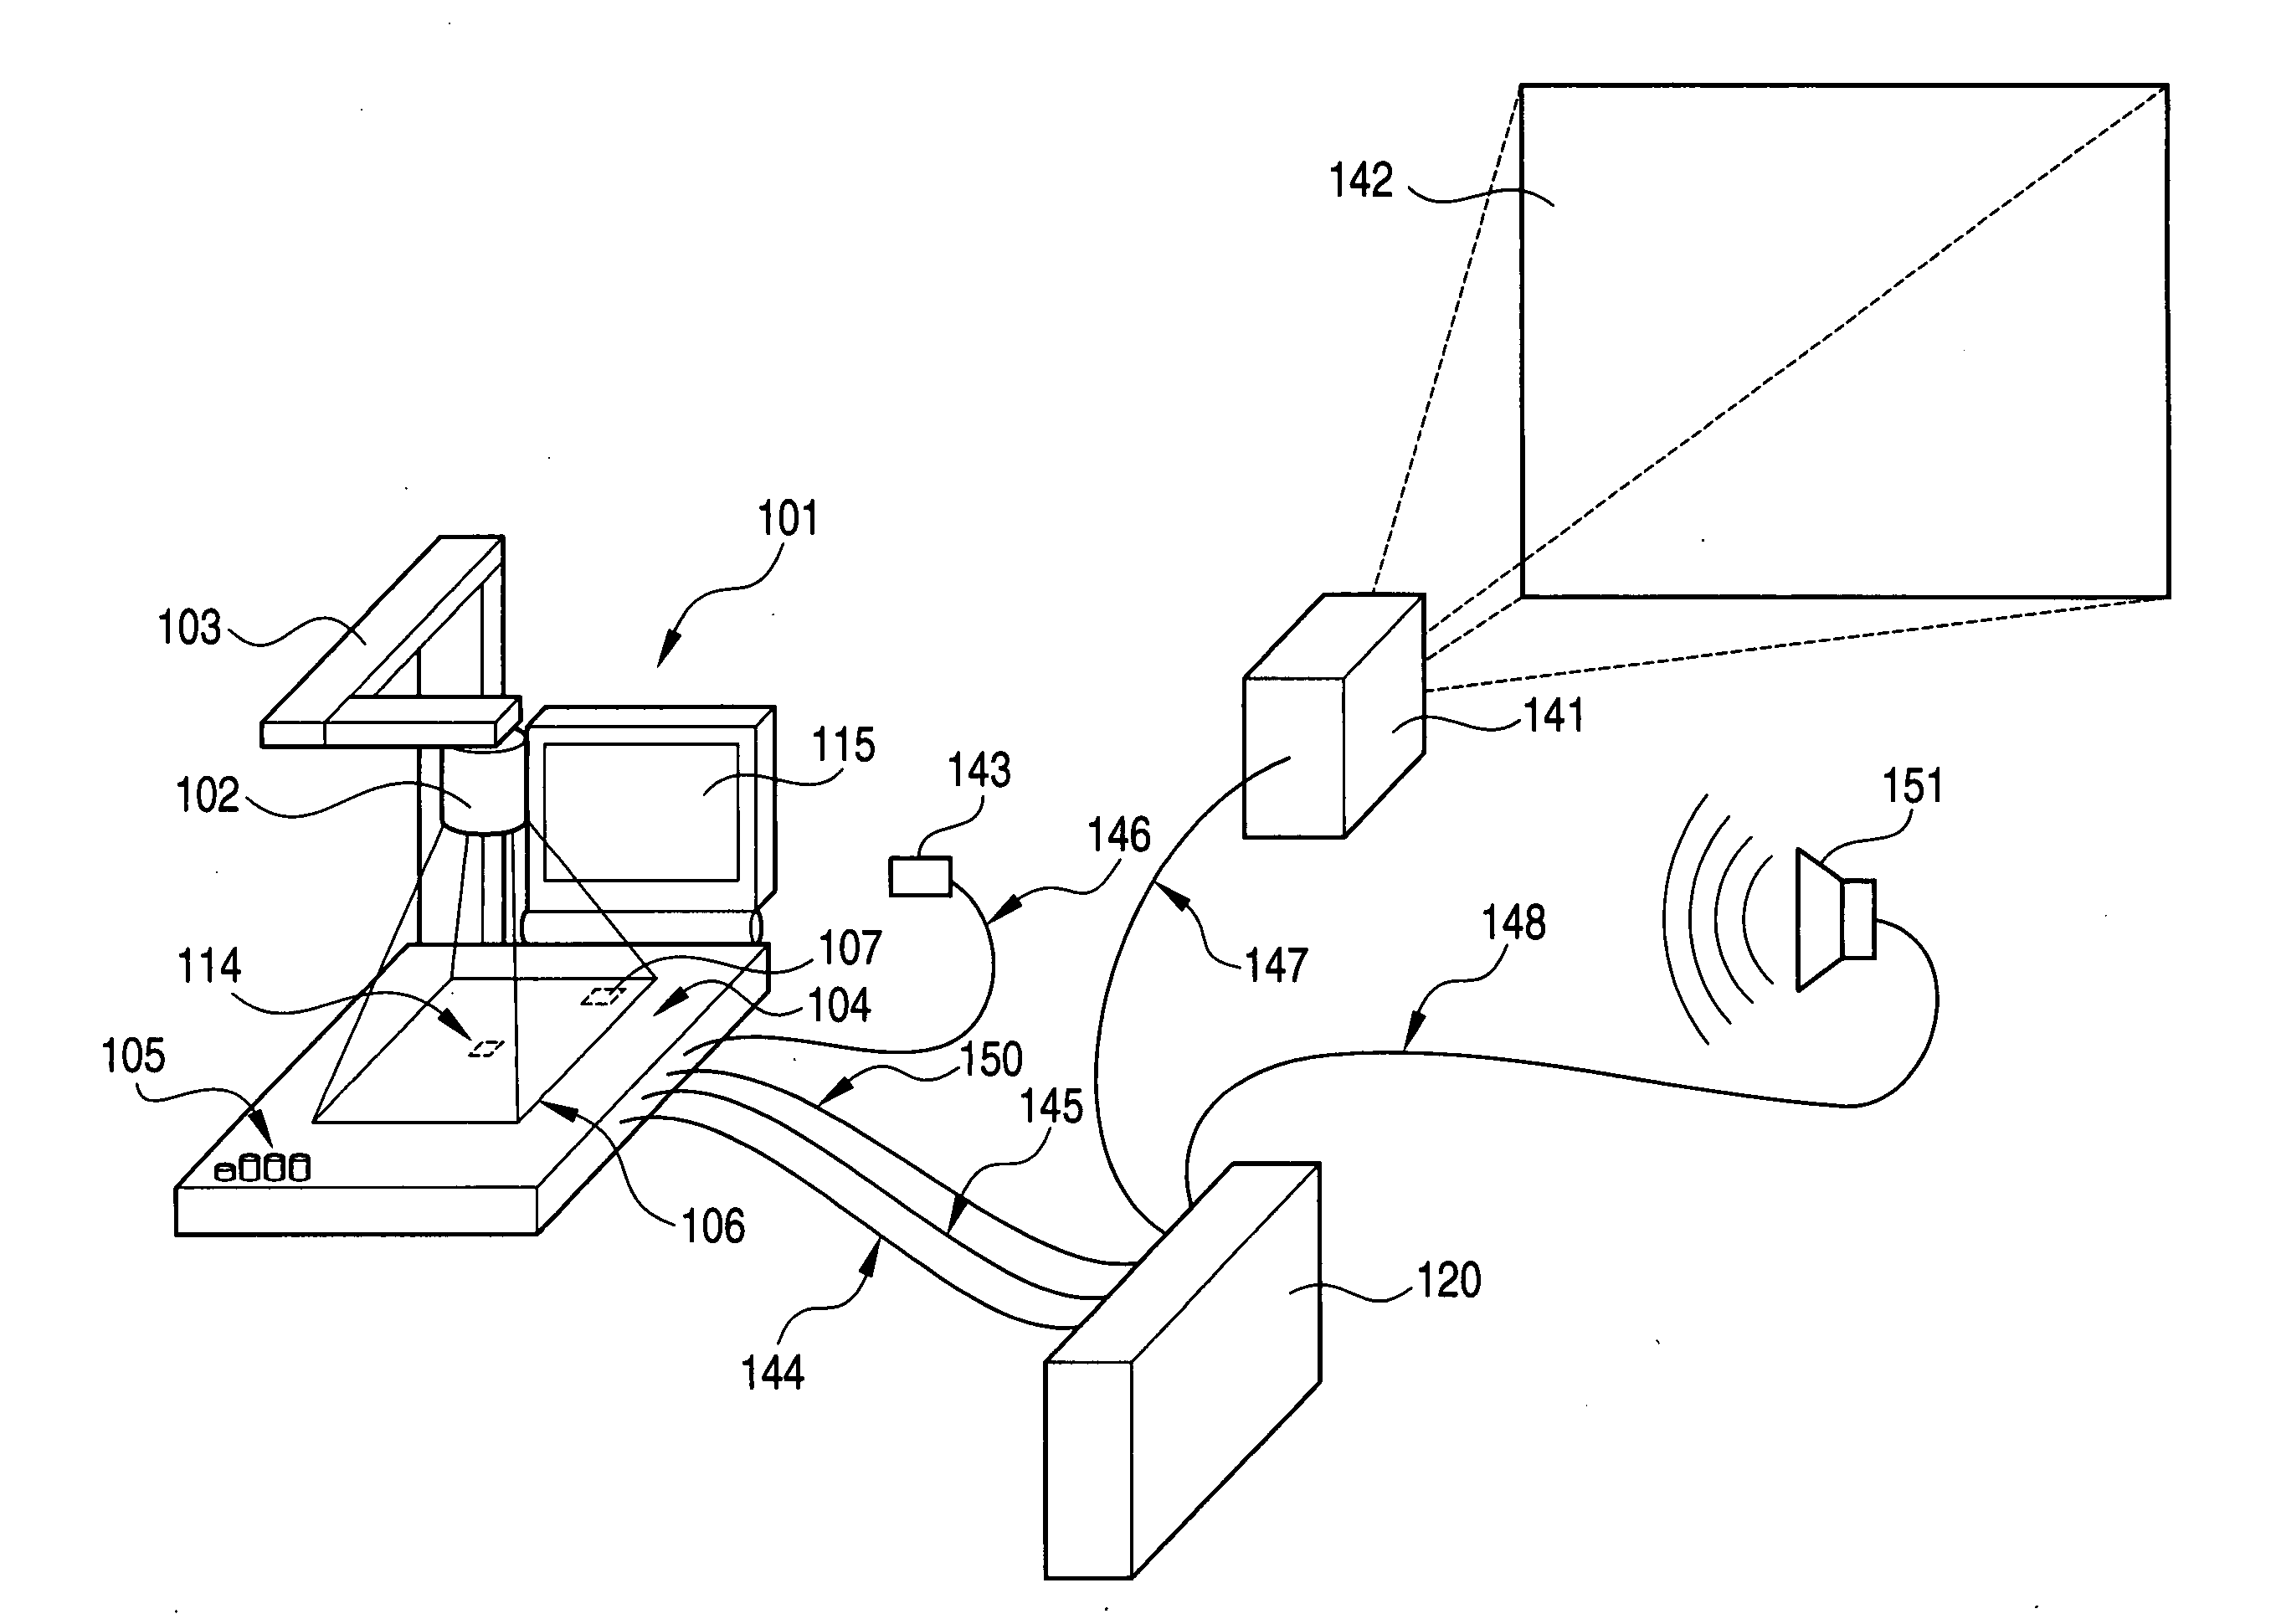 Content-producing device, output device and computer-readable medium